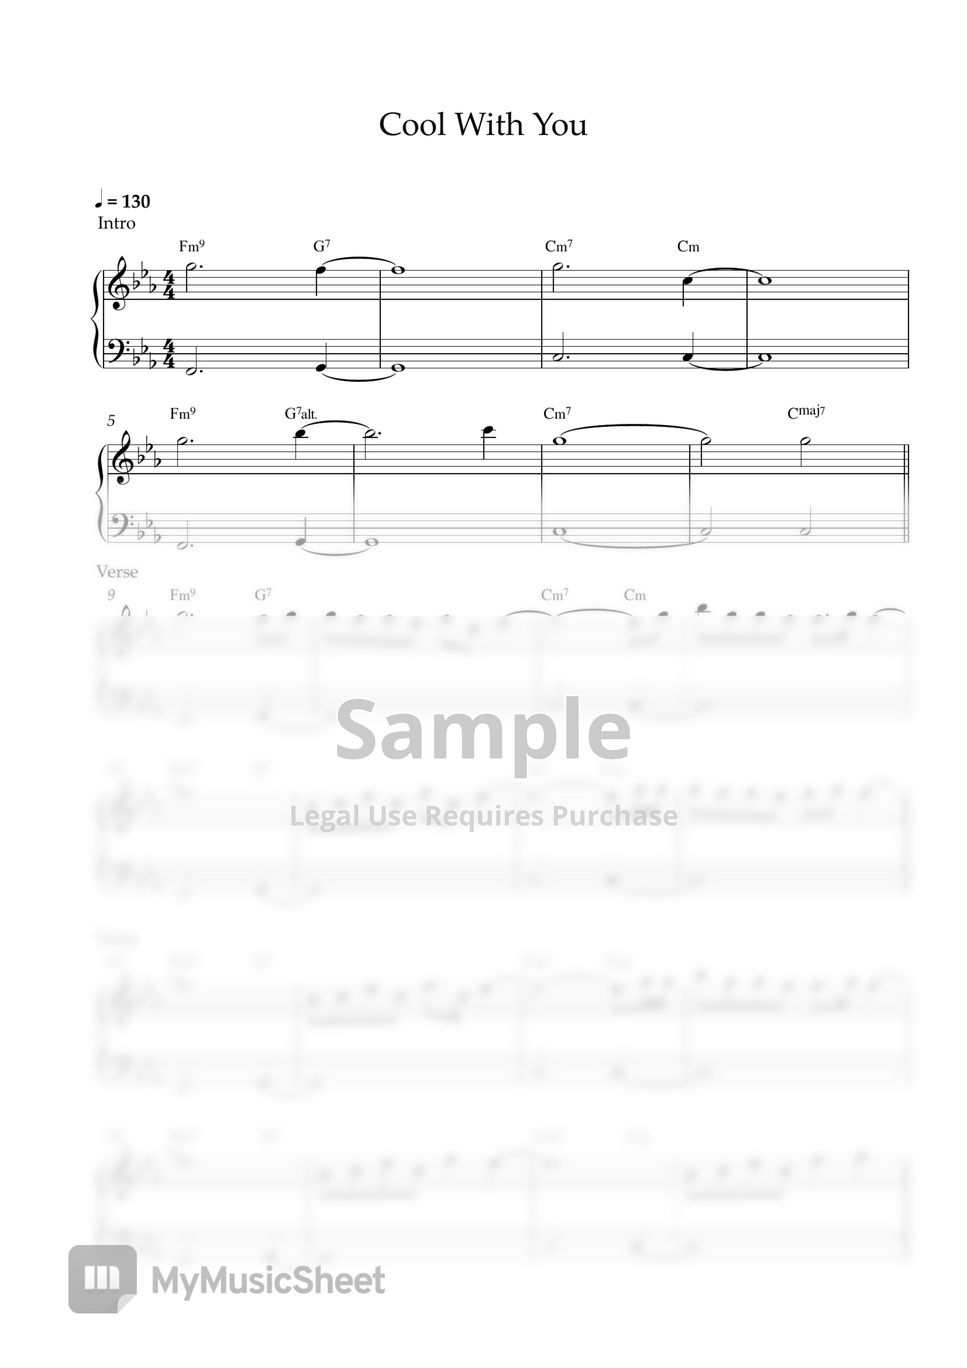 NewJeans - Cool With You (EASY PIANO SHEET) by Pianella Piano